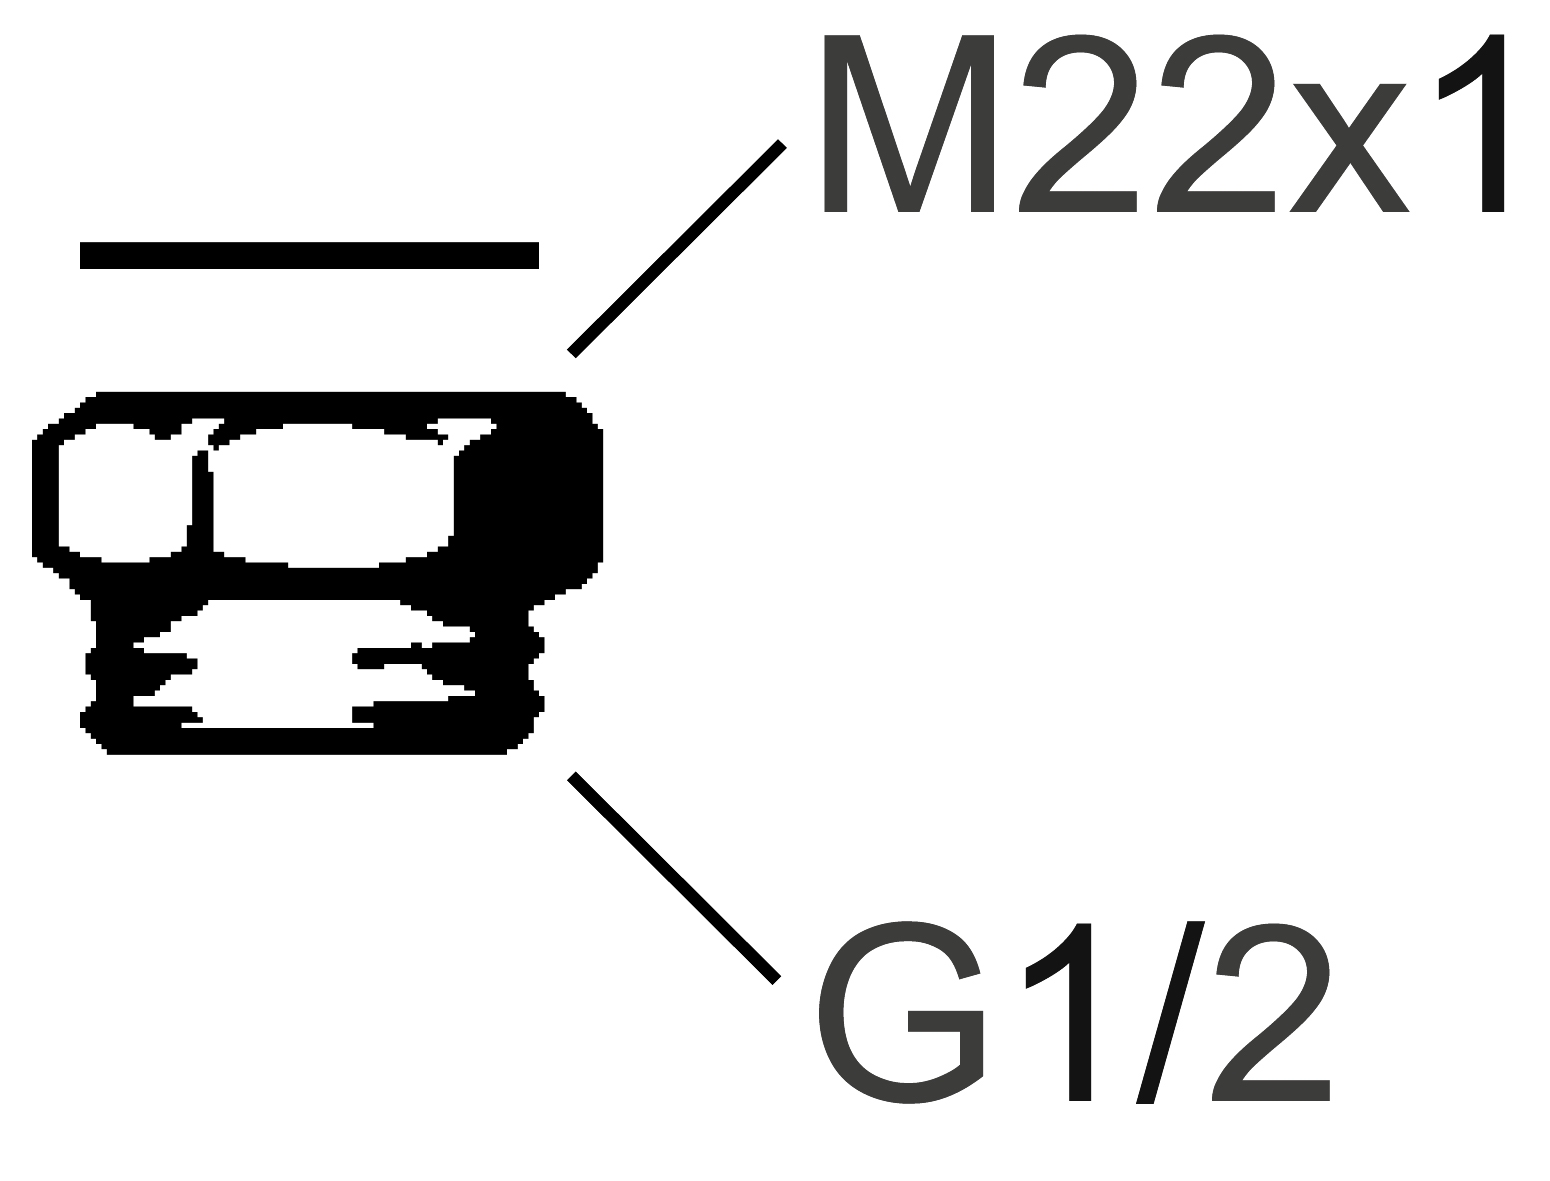 K2942-0009.png